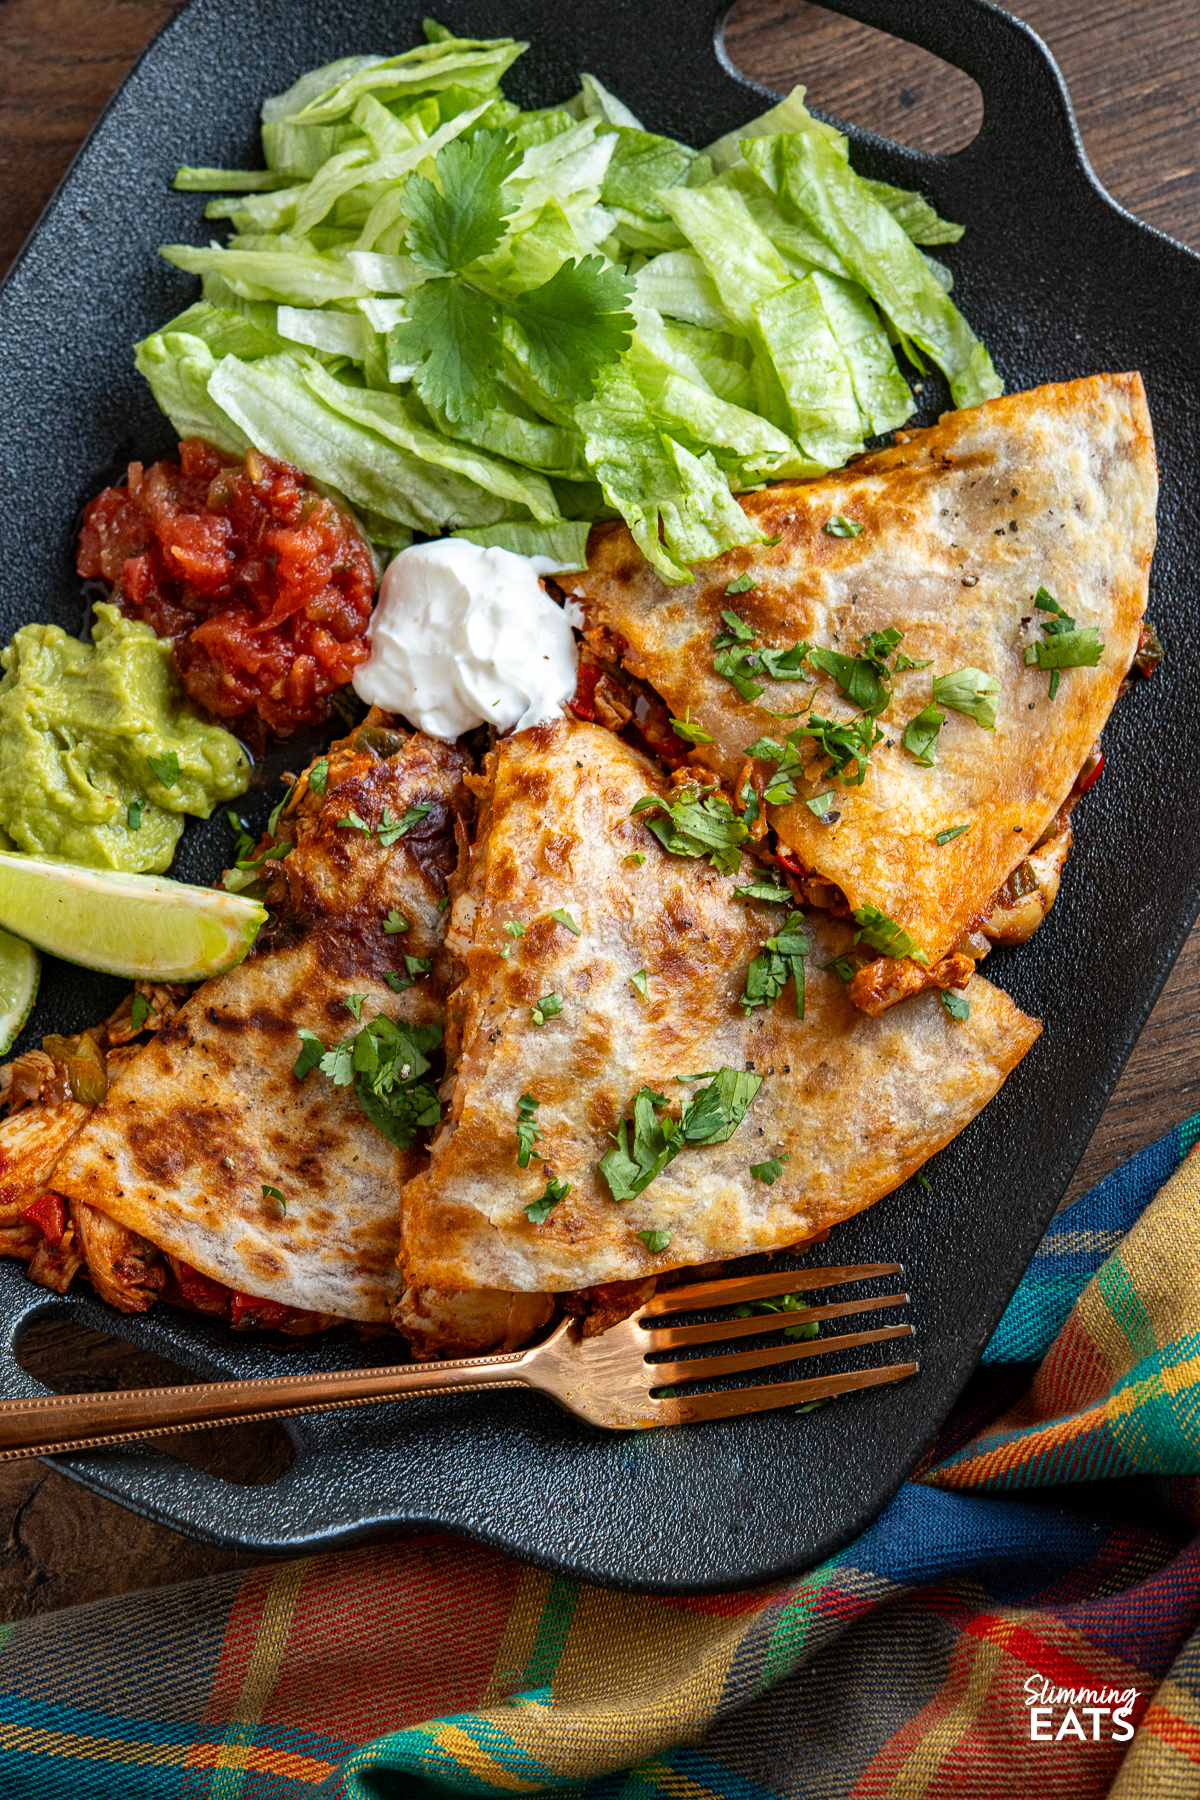 A serving of chicken quesadilla on a black plate, accompanied by lettuce, guacamole, salsa, and soured cream, decorated with scattered coriander and lime wedges.